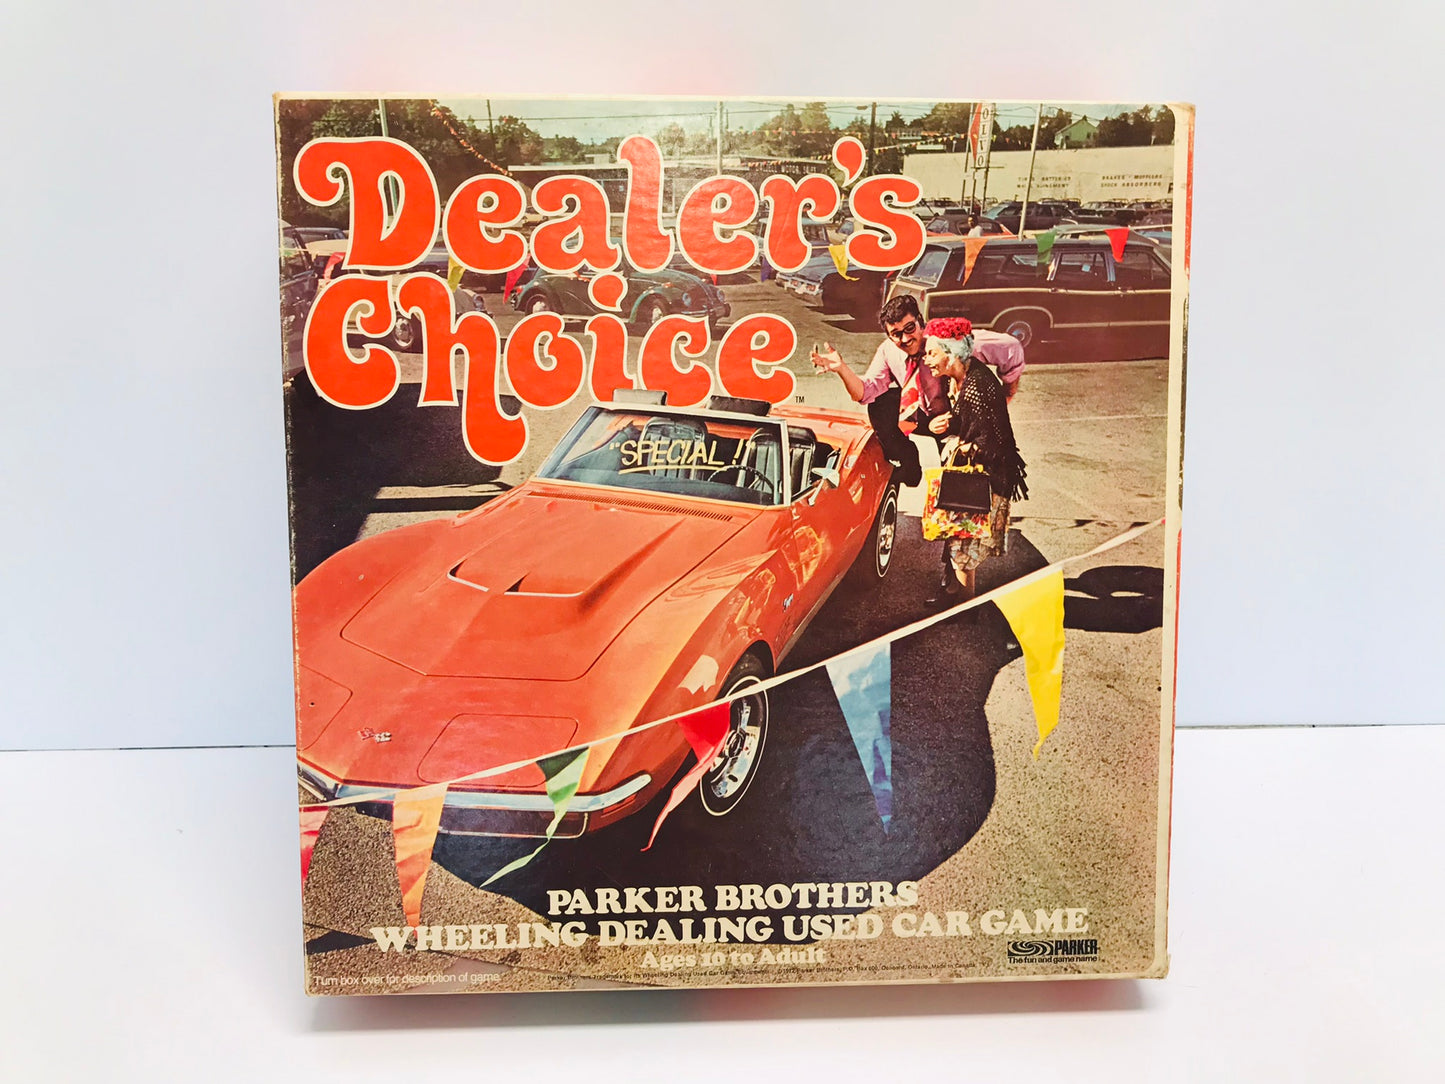 Game 1972 Dealers Choice Parkers Brothers Excellent Rare Missing 1 Blue Hook, 1 Auto, 2 Dealers Cards